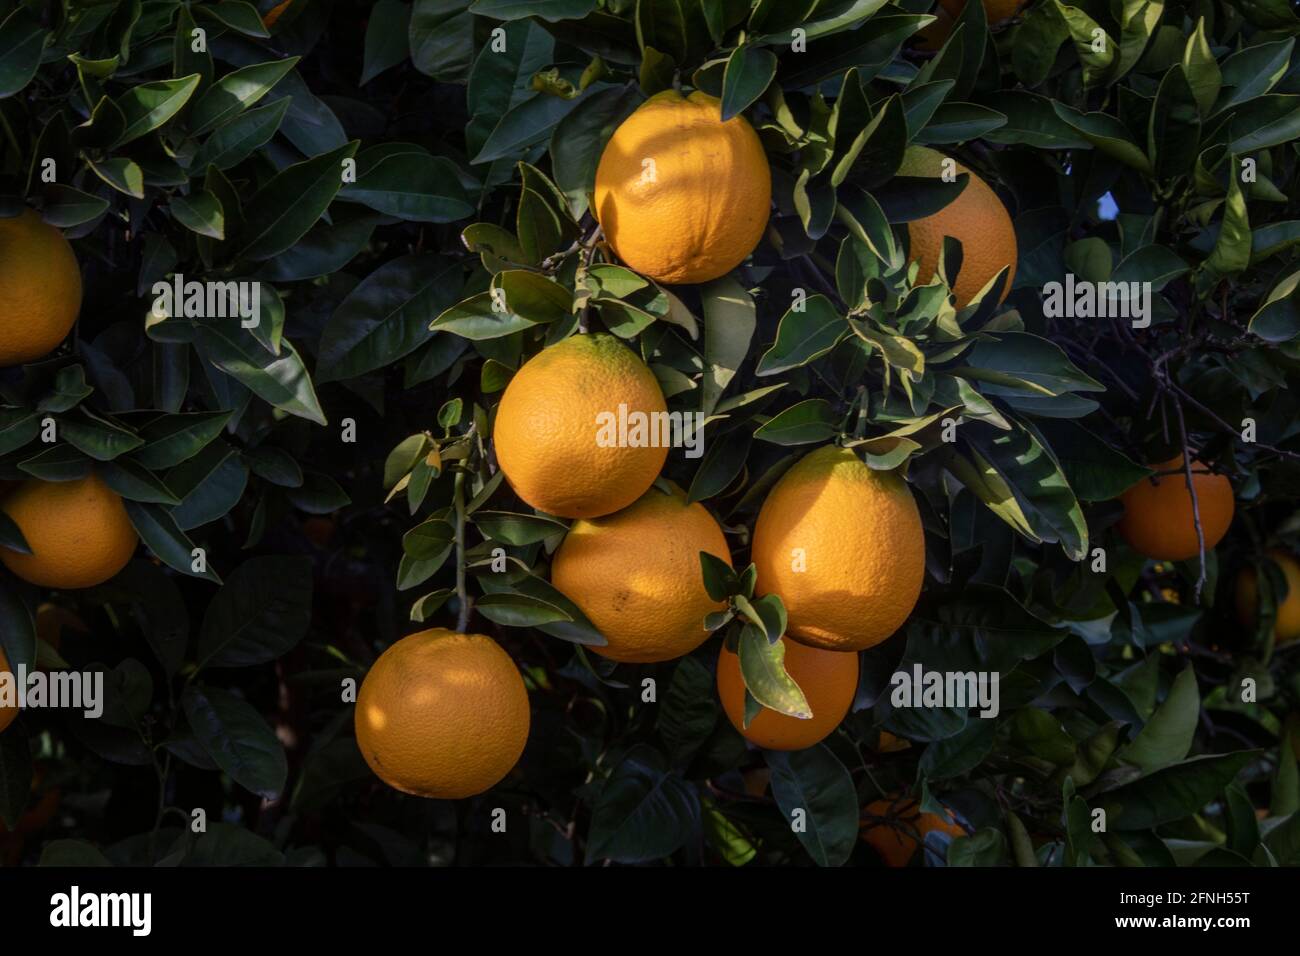 A close up, beautiful shot of a scenery that captures oranges on a tree in Mugla, Akyaka. This photo's realistic shot creates an incredible aesthetic. Stock Photo